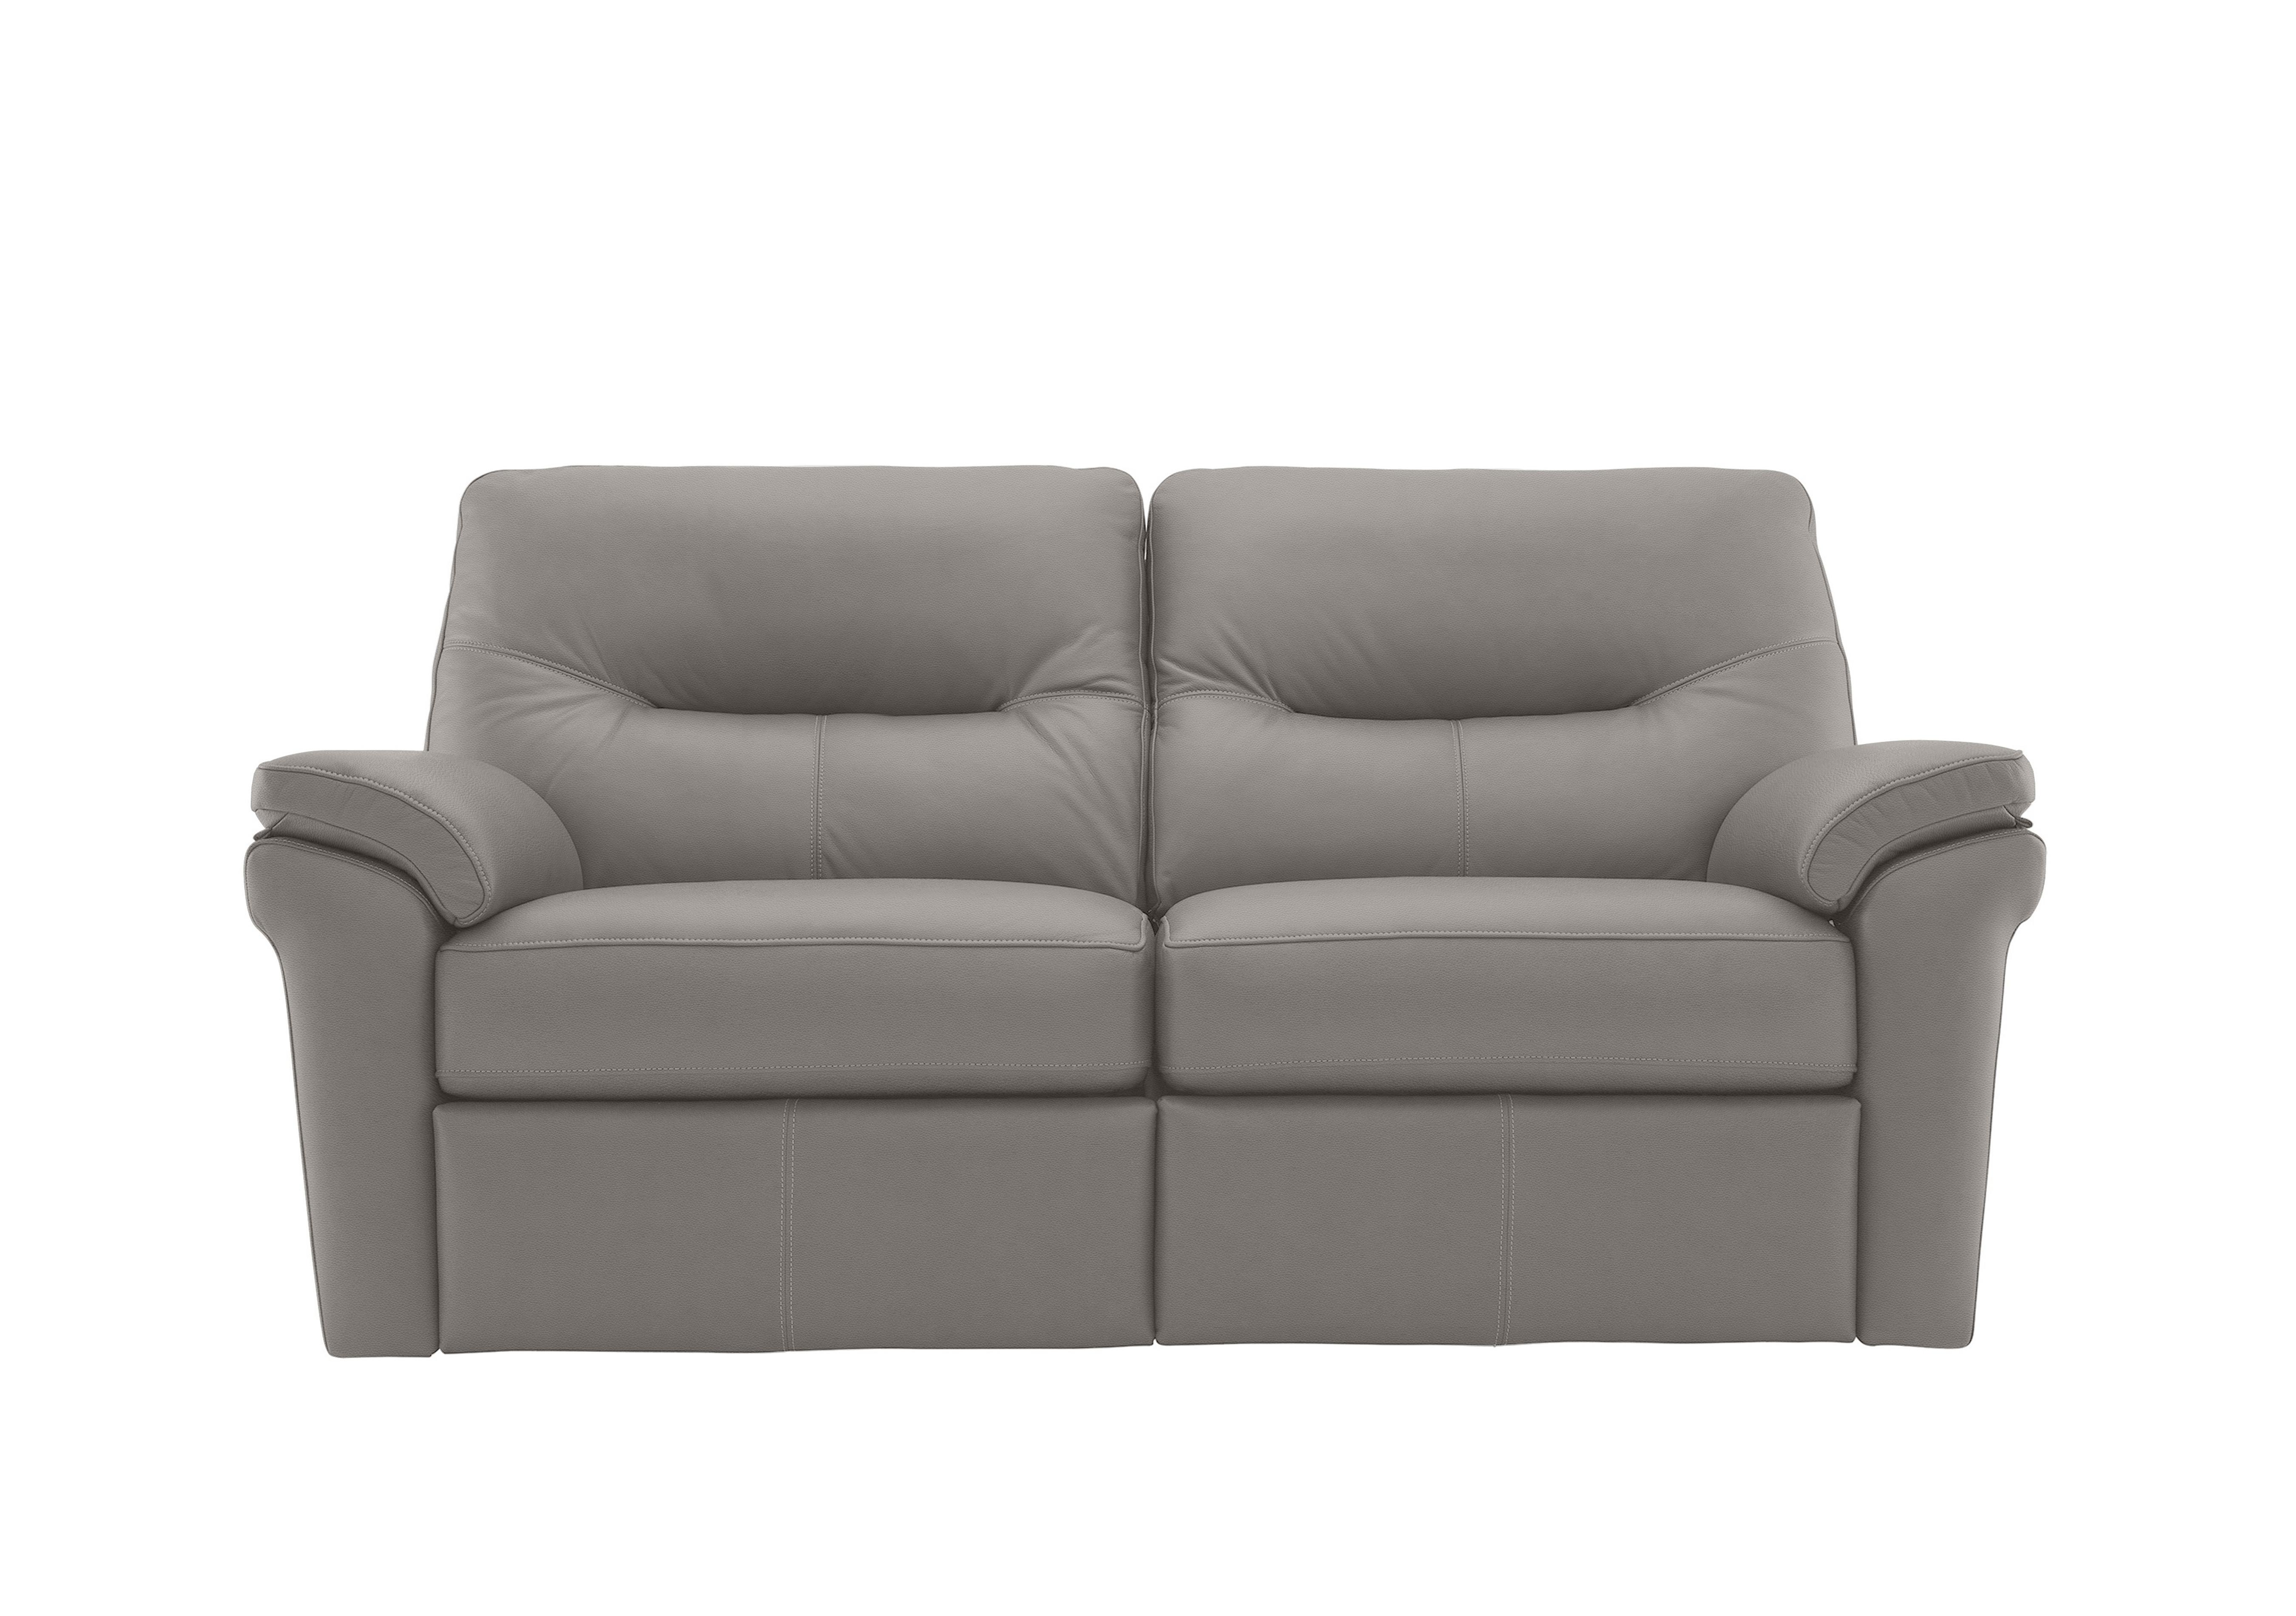 Seattle 2.5 Seater Leather Power Recliner Sofa with Power Lumbar in L842 Cambridge Grey on Furniture Village